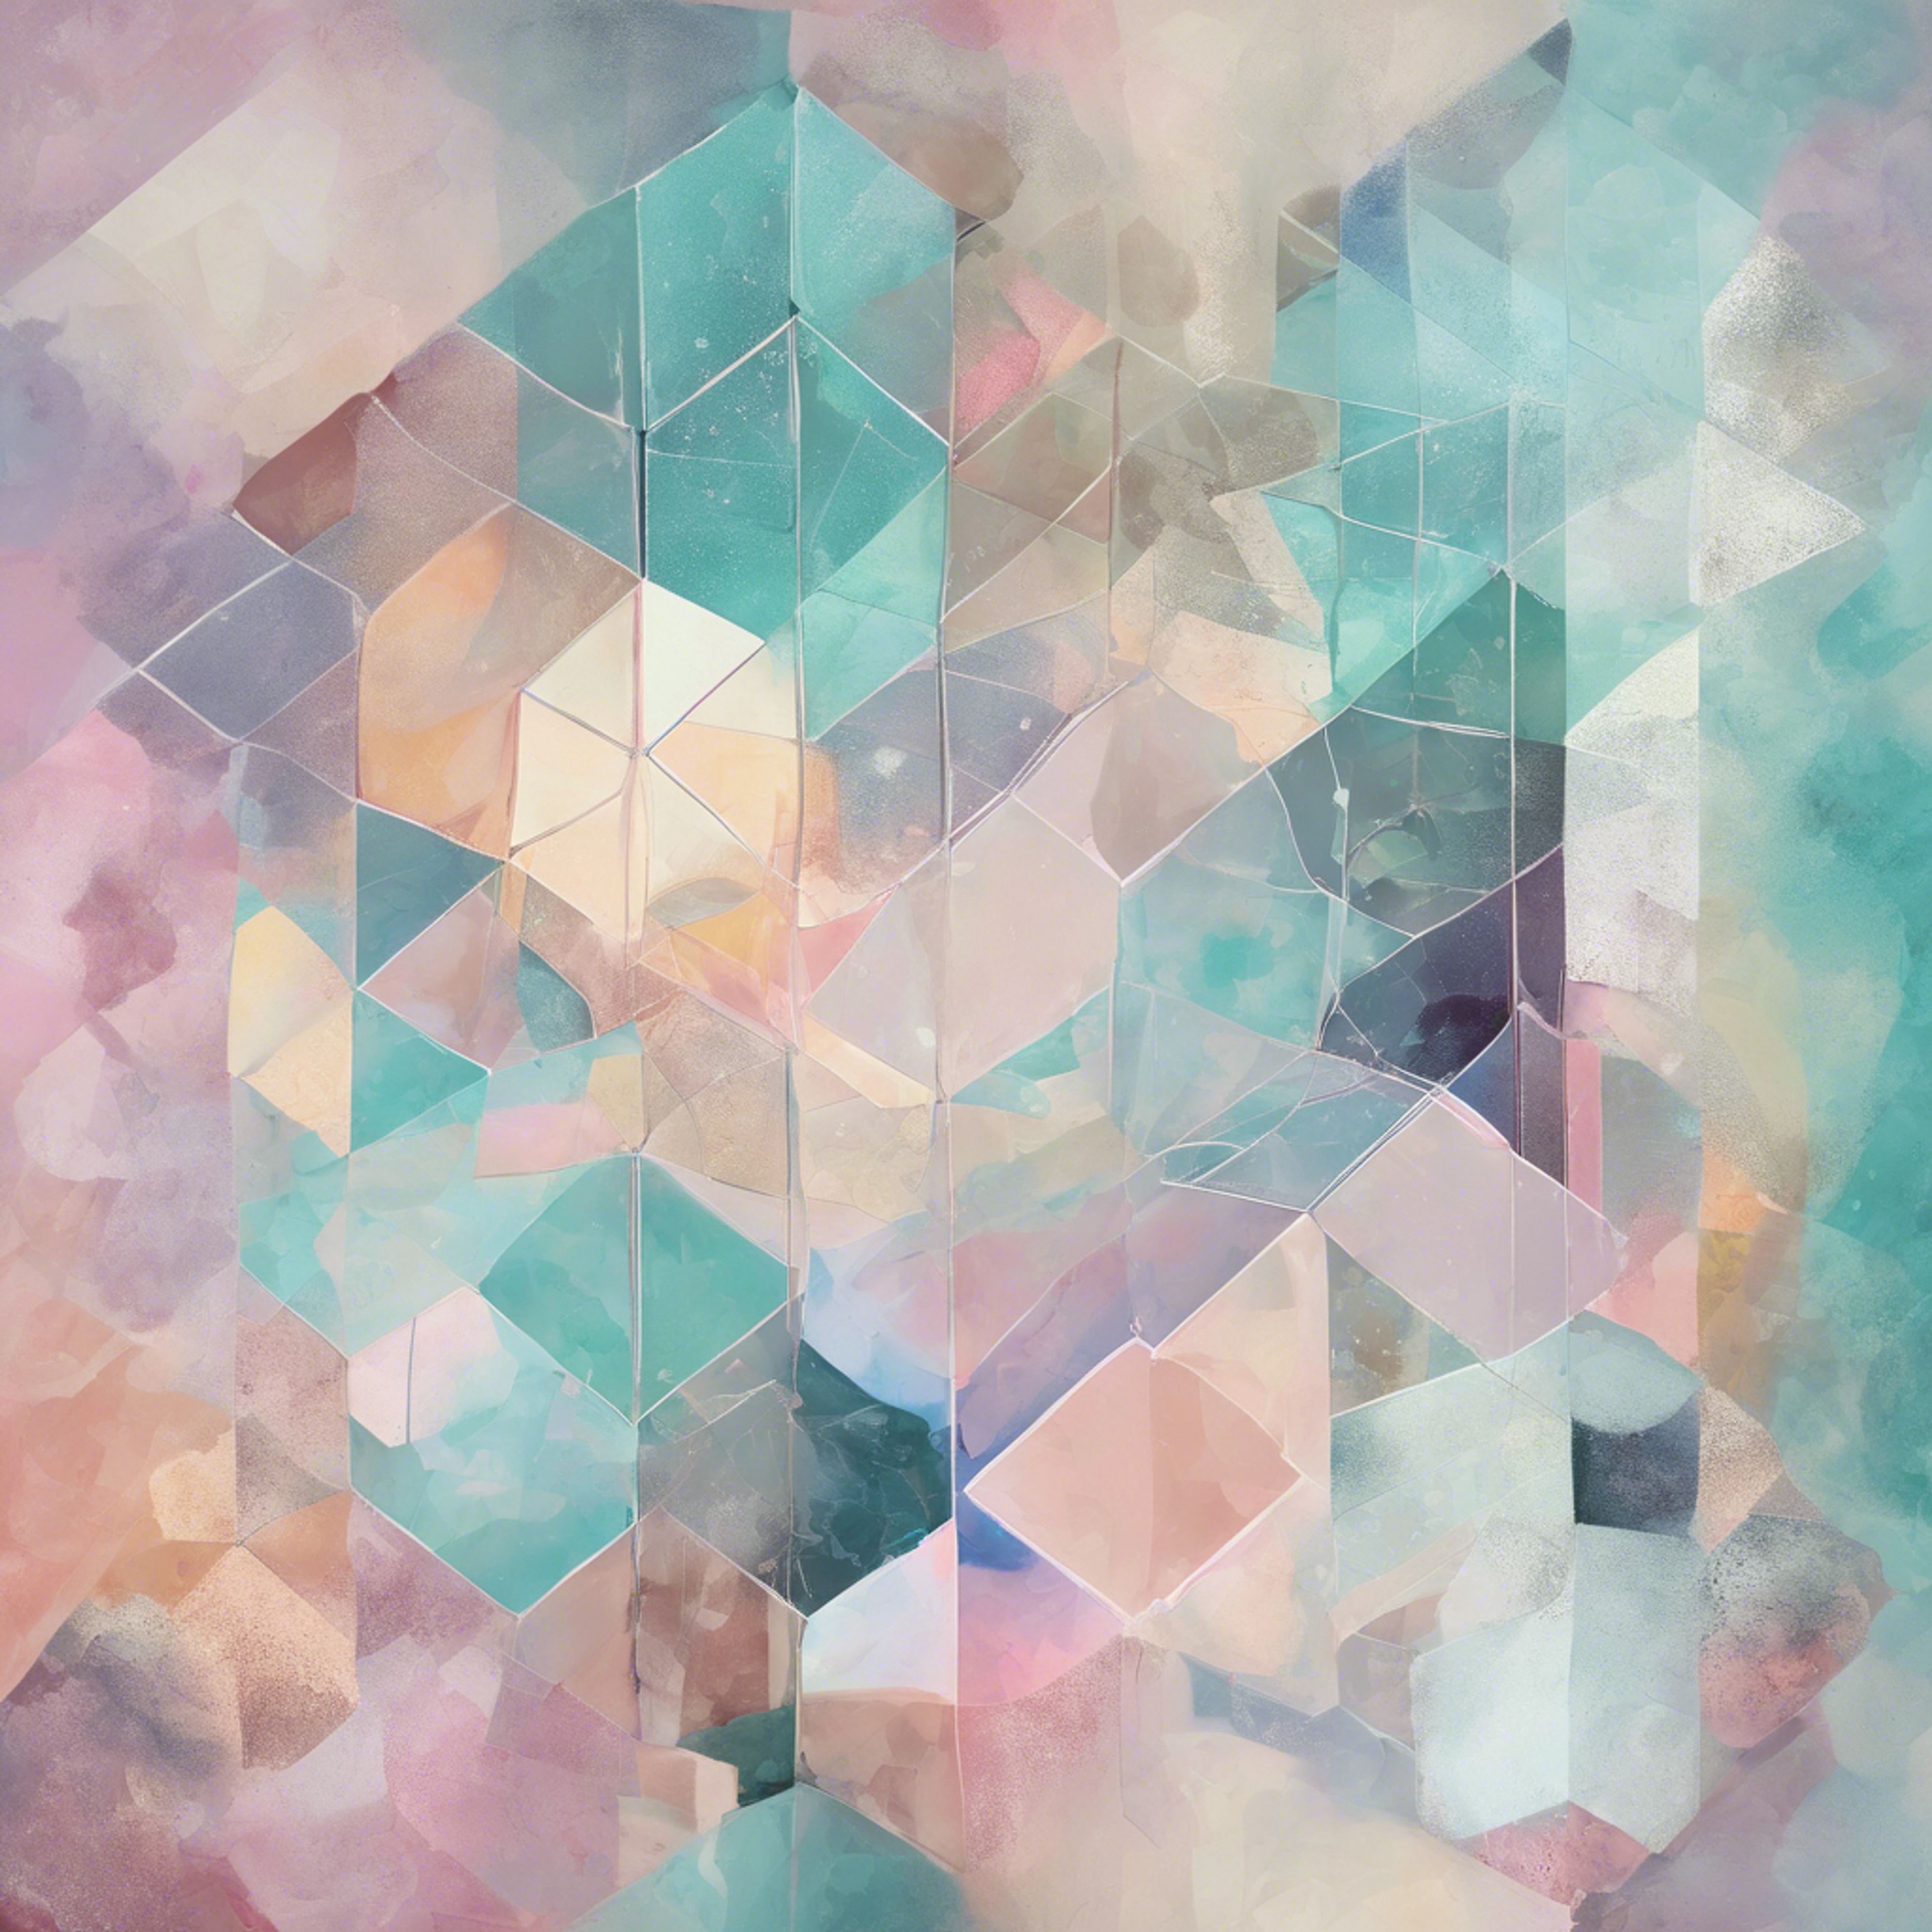 A cool pastel colored abstract painting emphasizing geometric patterns. Kertas dinding[4610bdb5de564f779c91]